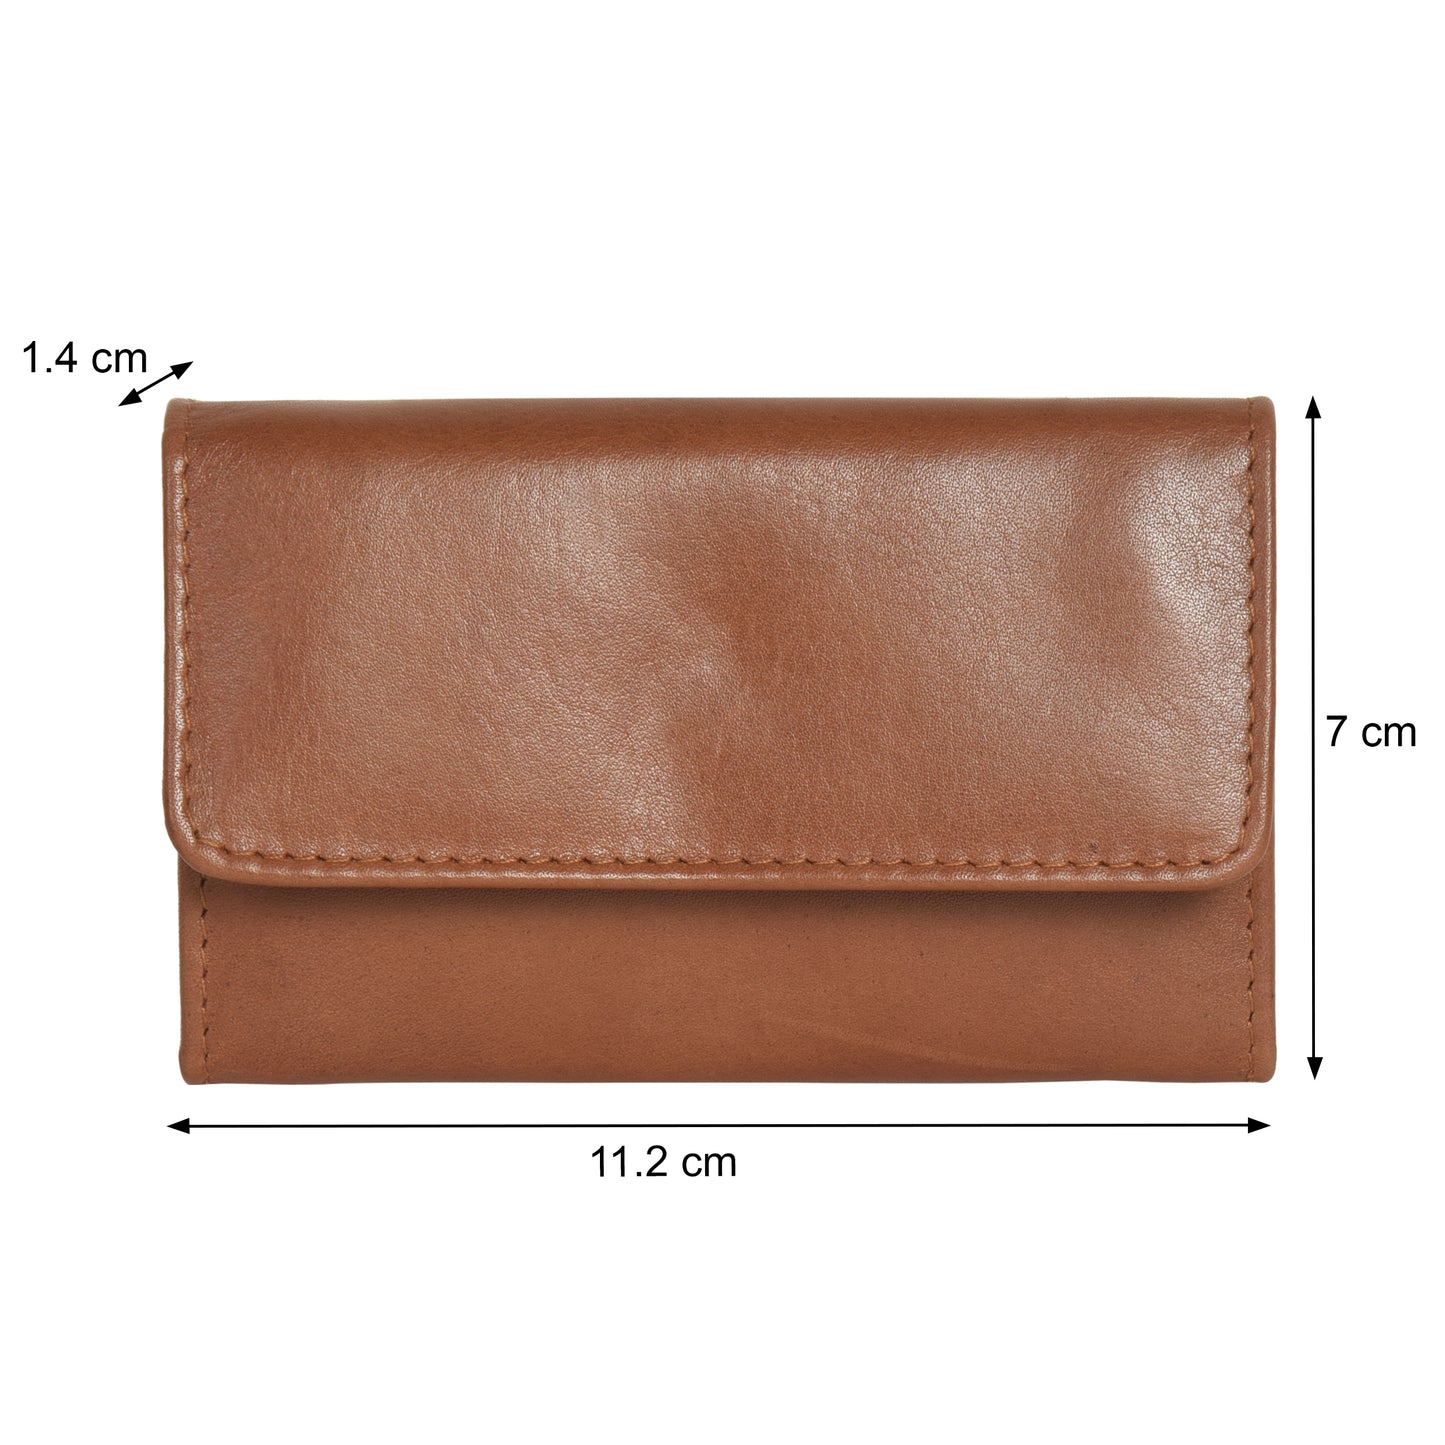 GT-KR1: G&T Full-grain Leather Trifold Key Holder and case with 6 Keyring Slots